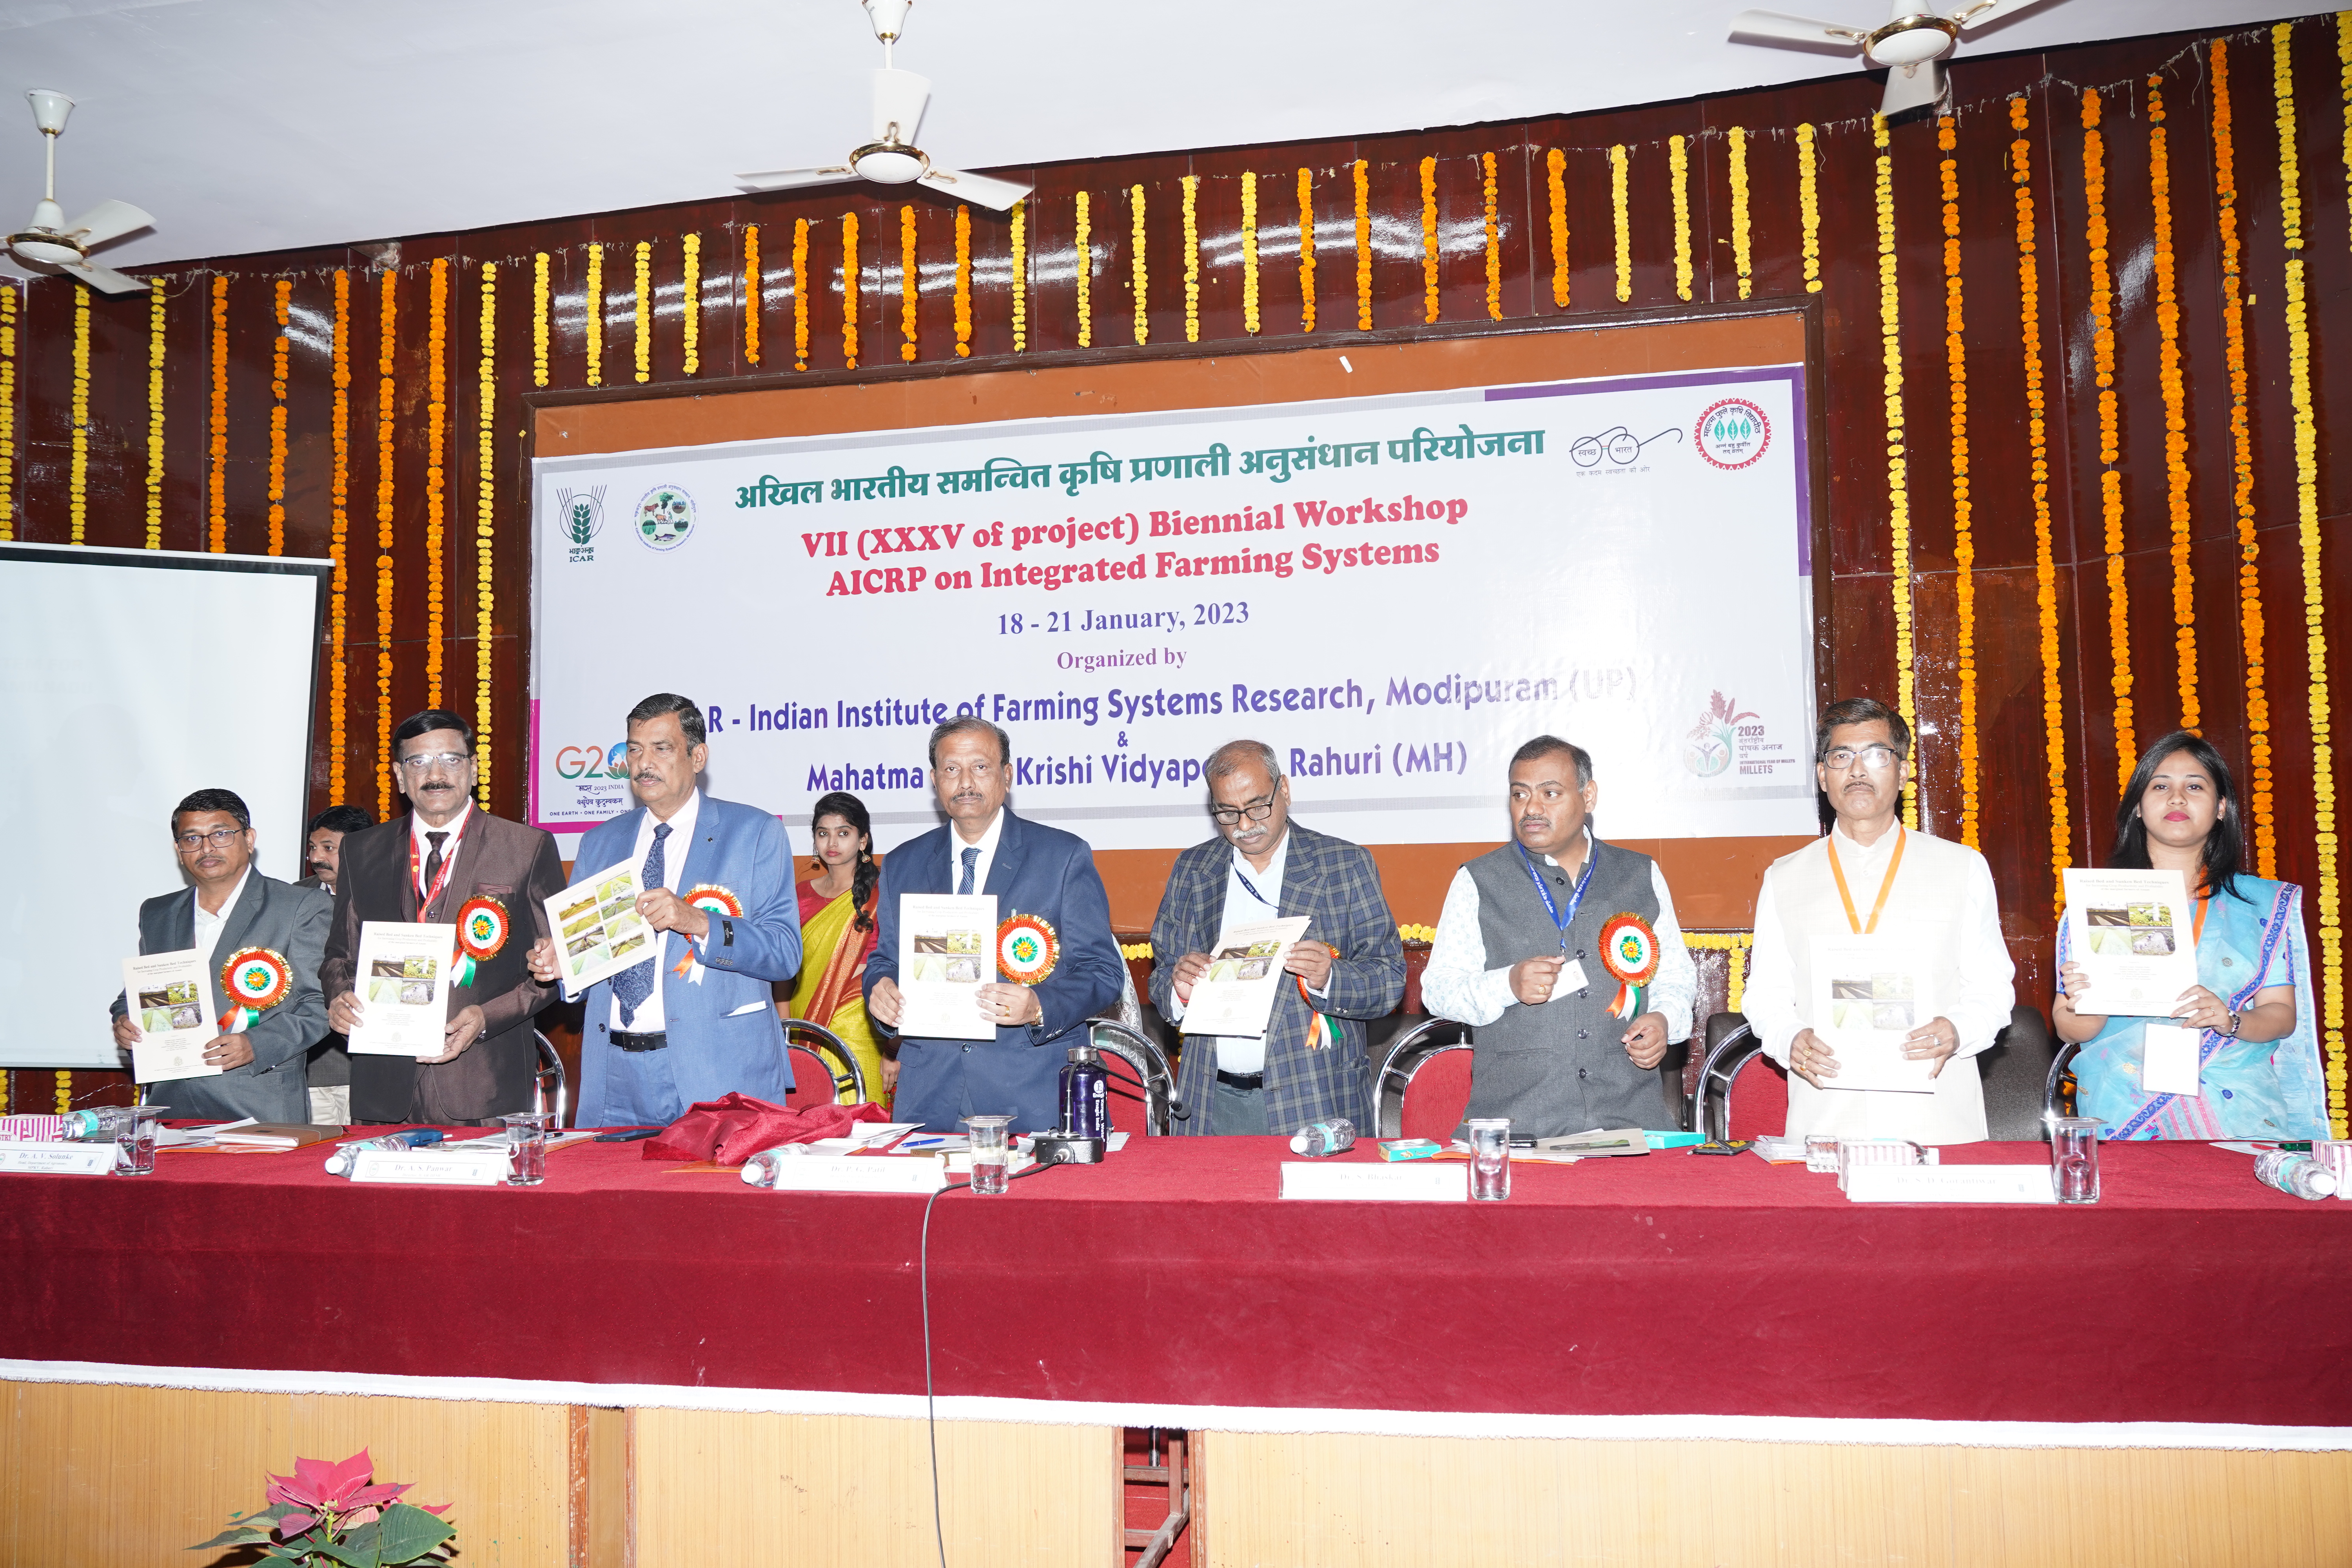 Inauguration of VII Biennial Workshop- AICRP on Integrated Farming Systems 18th January,2023